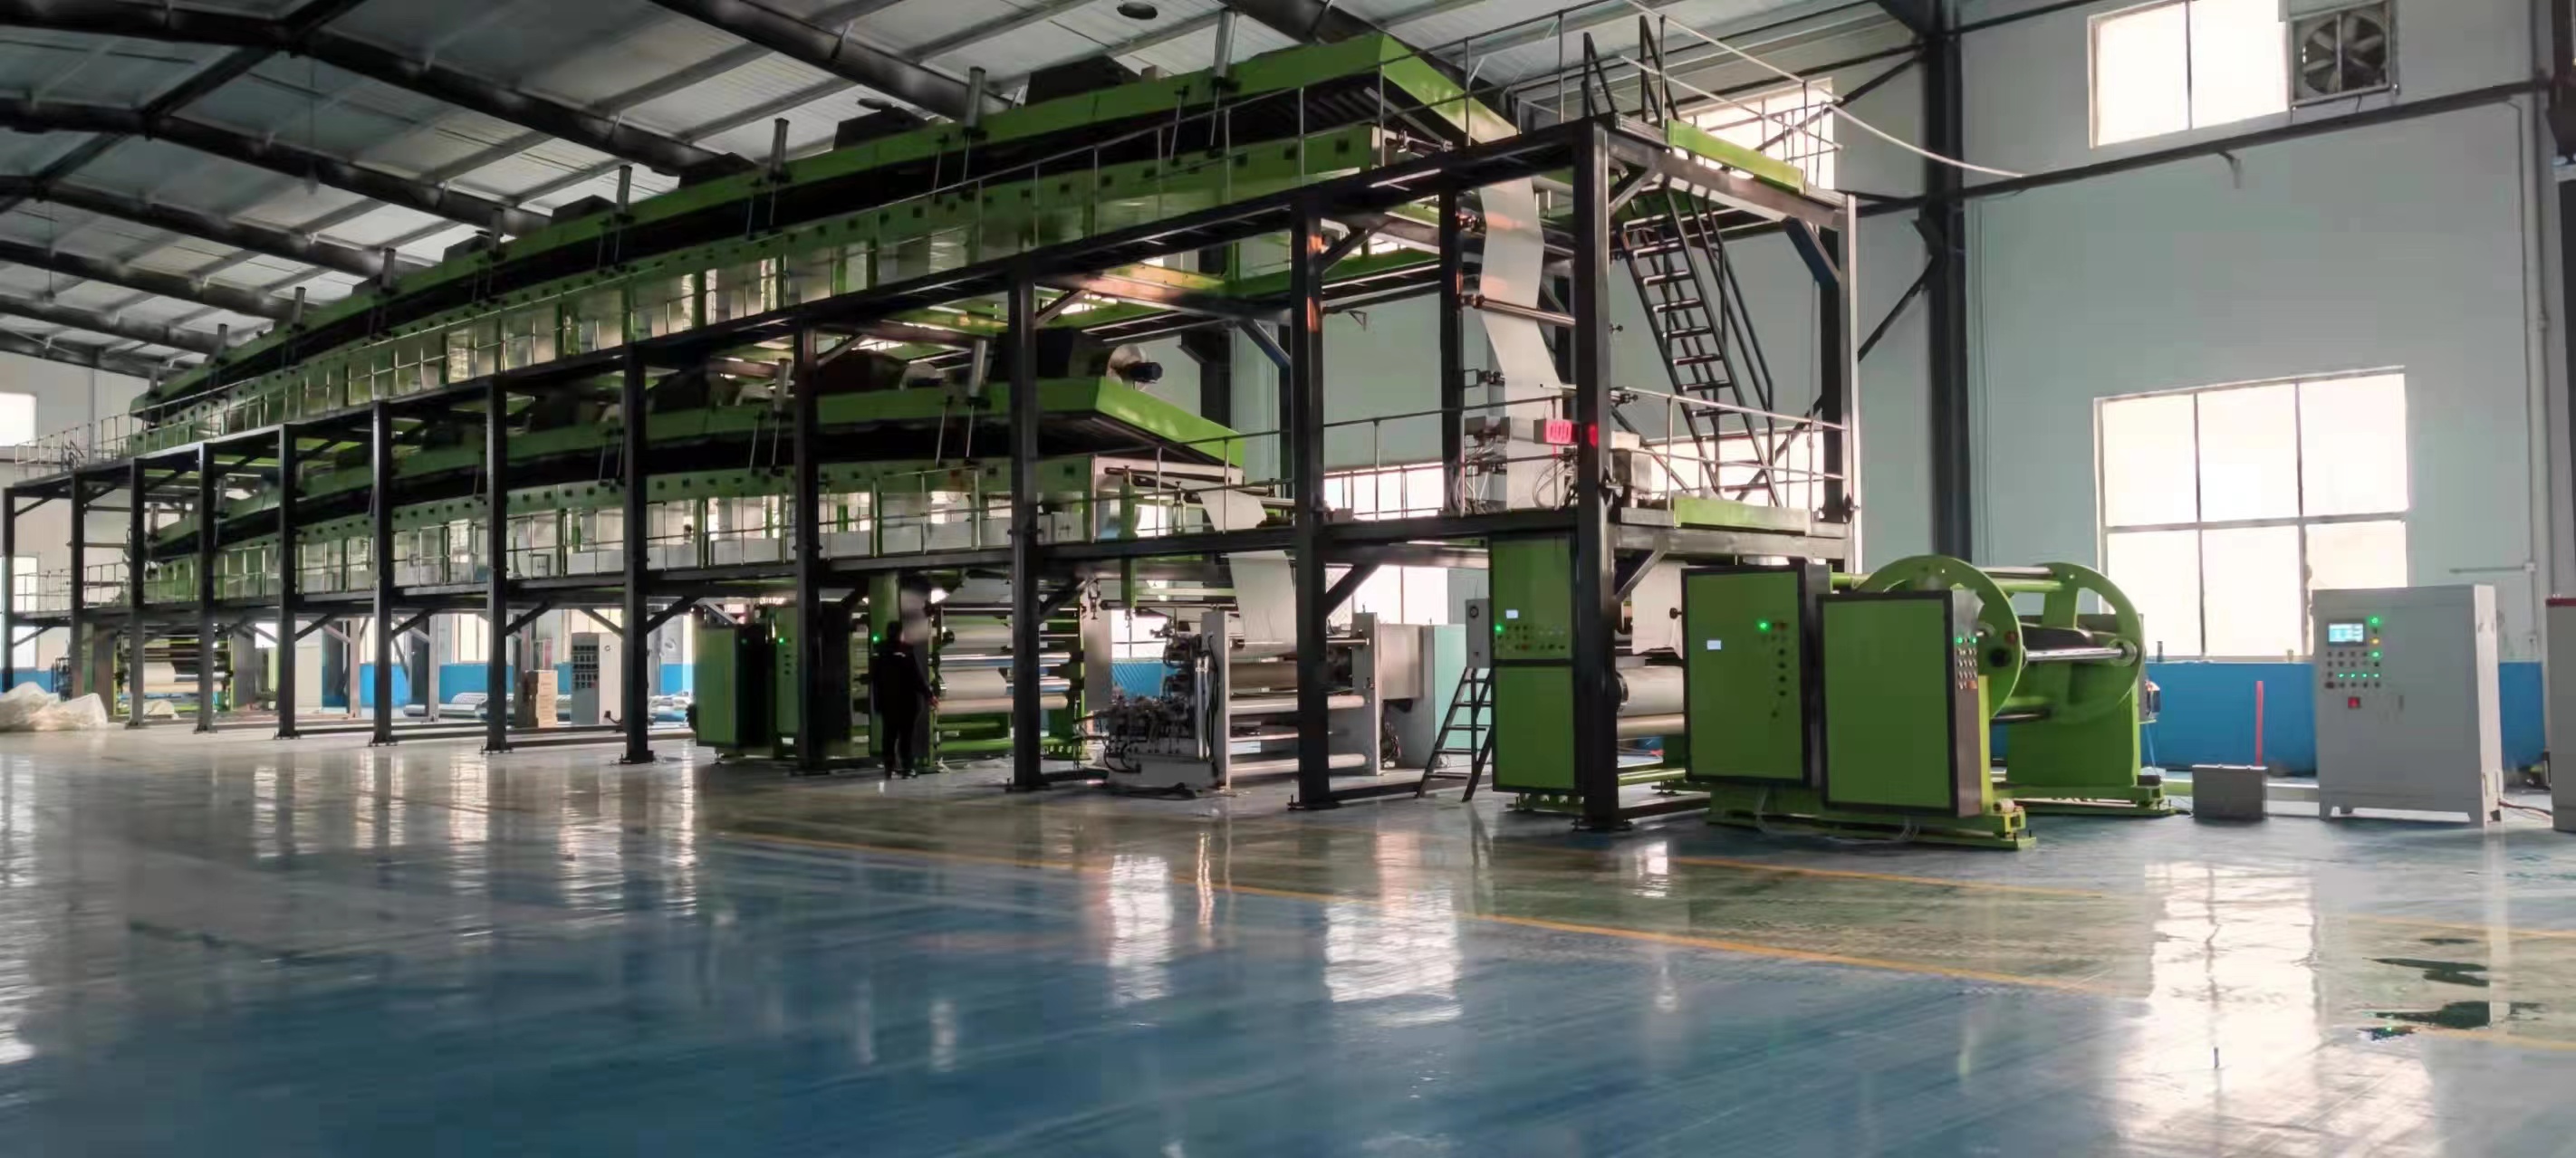 Big customer! Ordered two sets of double sided release paper coating machine in a year!